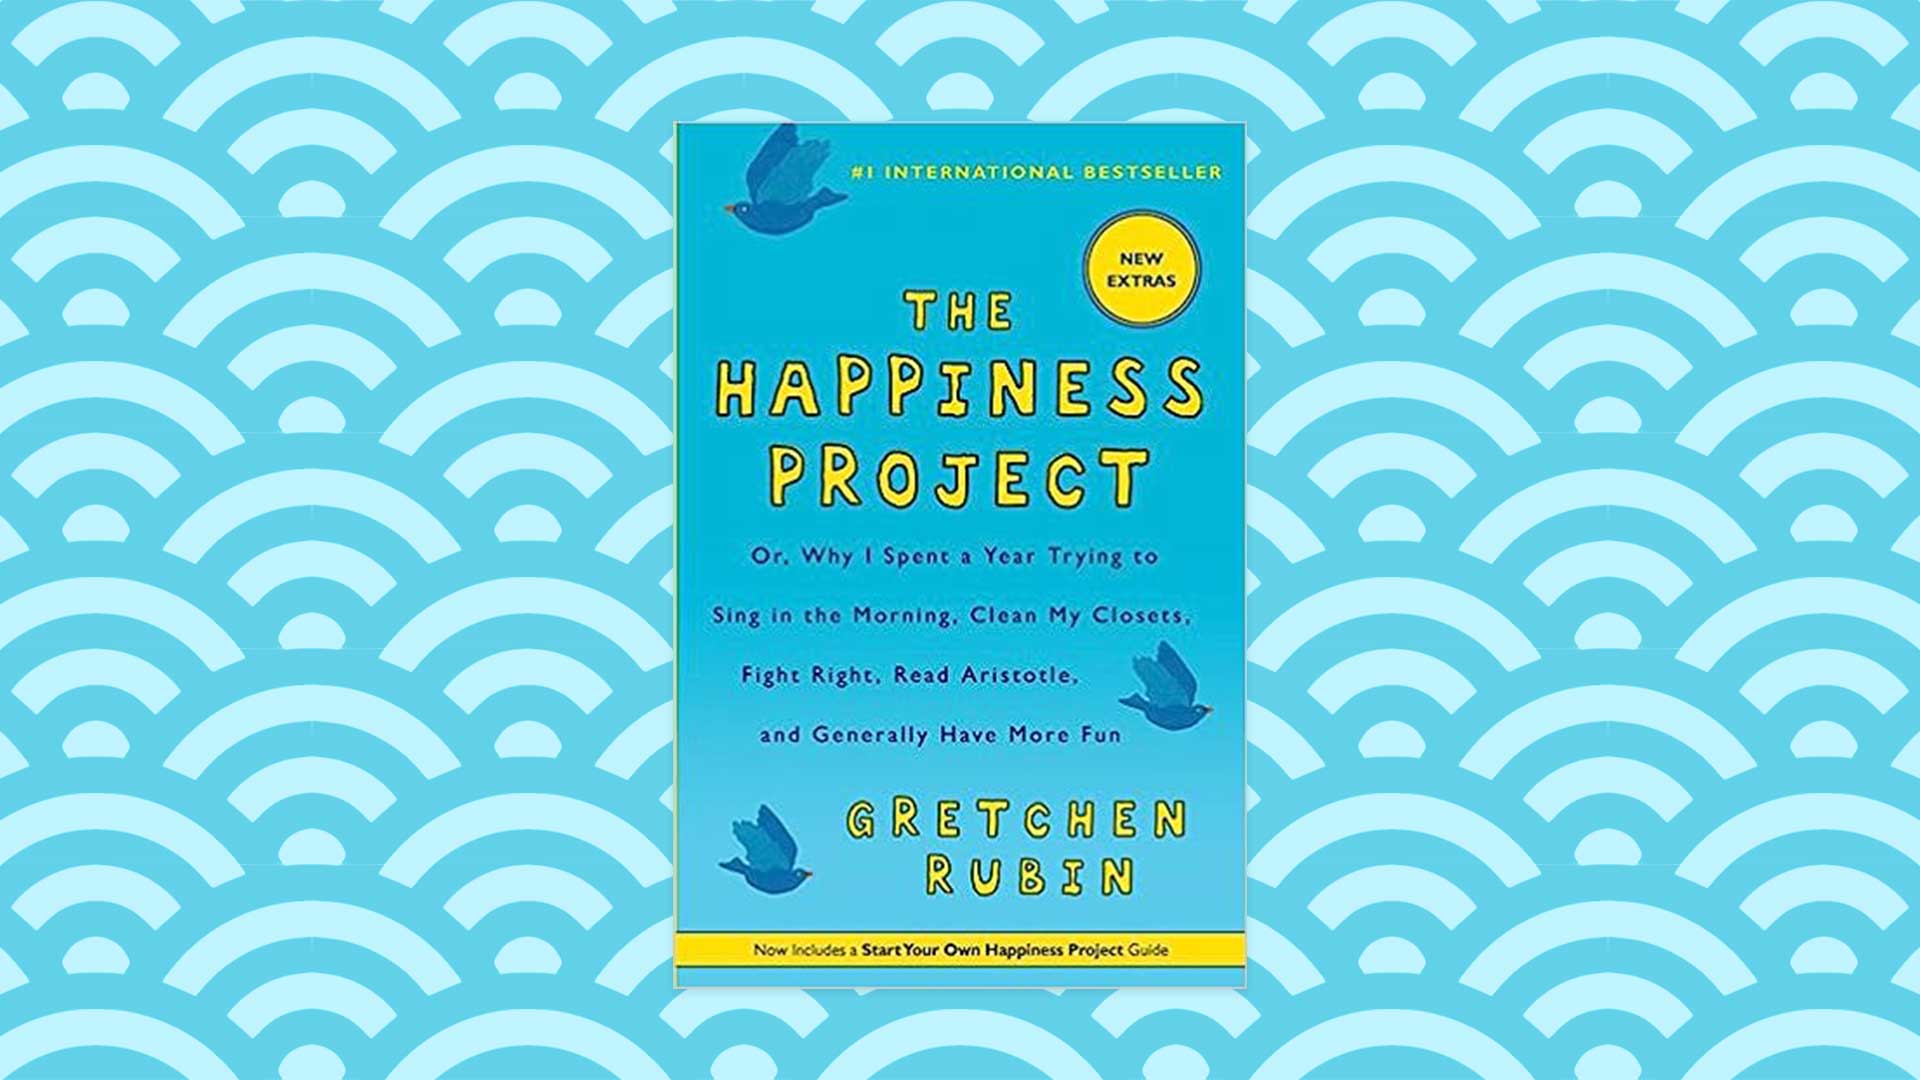 Book of the Month: “The Happiness Project”